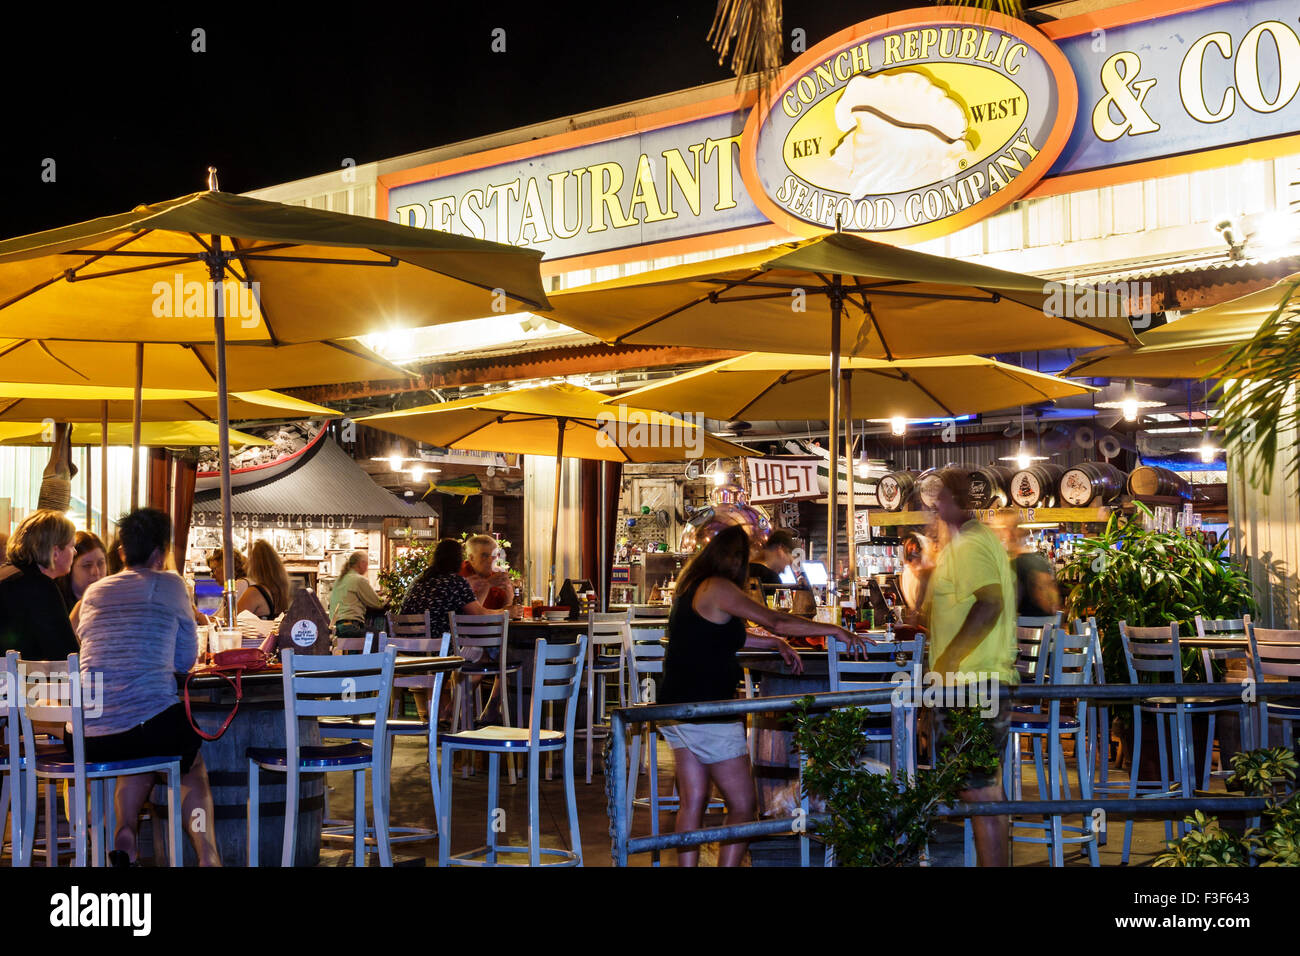 Key West Florida,Keys Old Town,Harbor Walk,harbour,bight,night evening,Conch Republic Seafood Company,restaurant restaurants food dining cafe cafes,ta Stock Photo